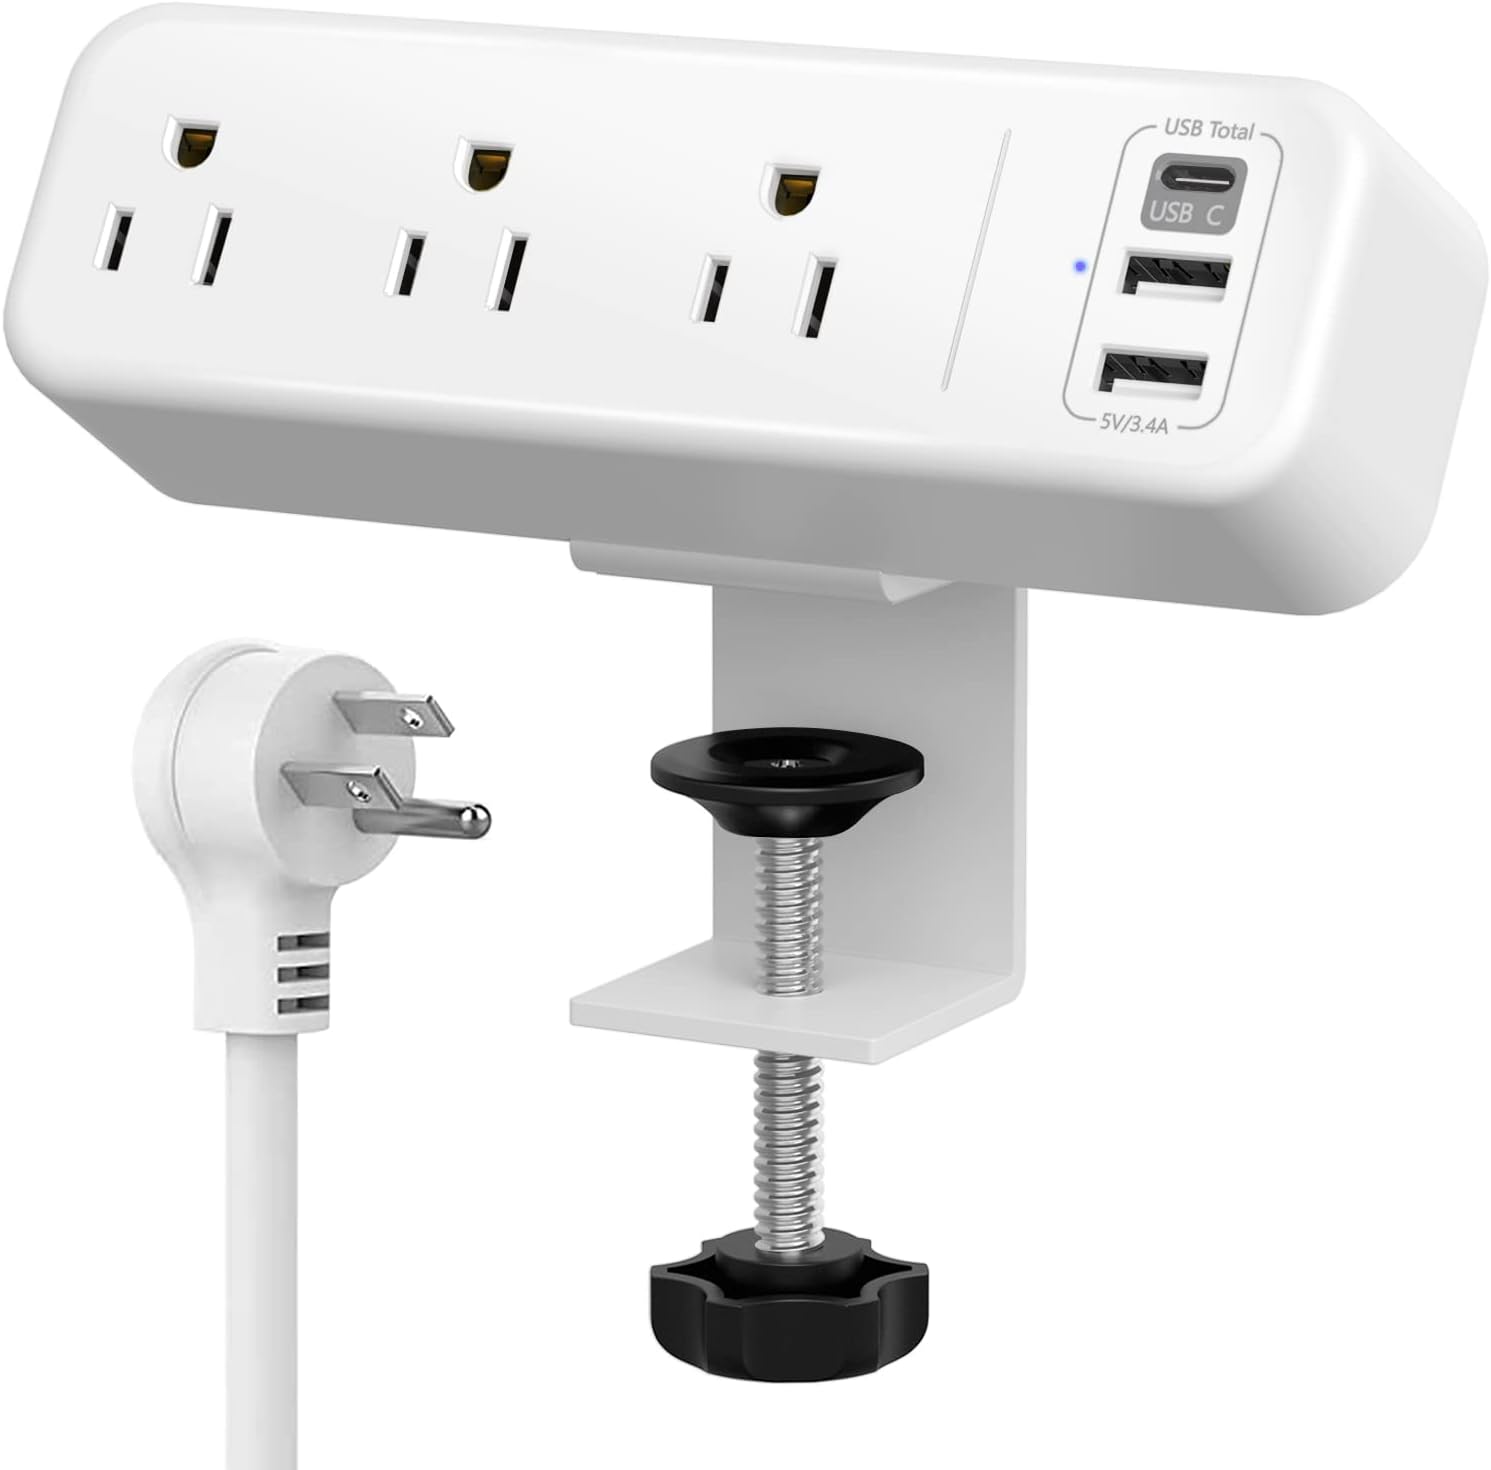 Desk Clamp Power Strip with USB C, 3 Outlets Desktop Mount Power Station with 6.5 ft Plug Extension Cord, White